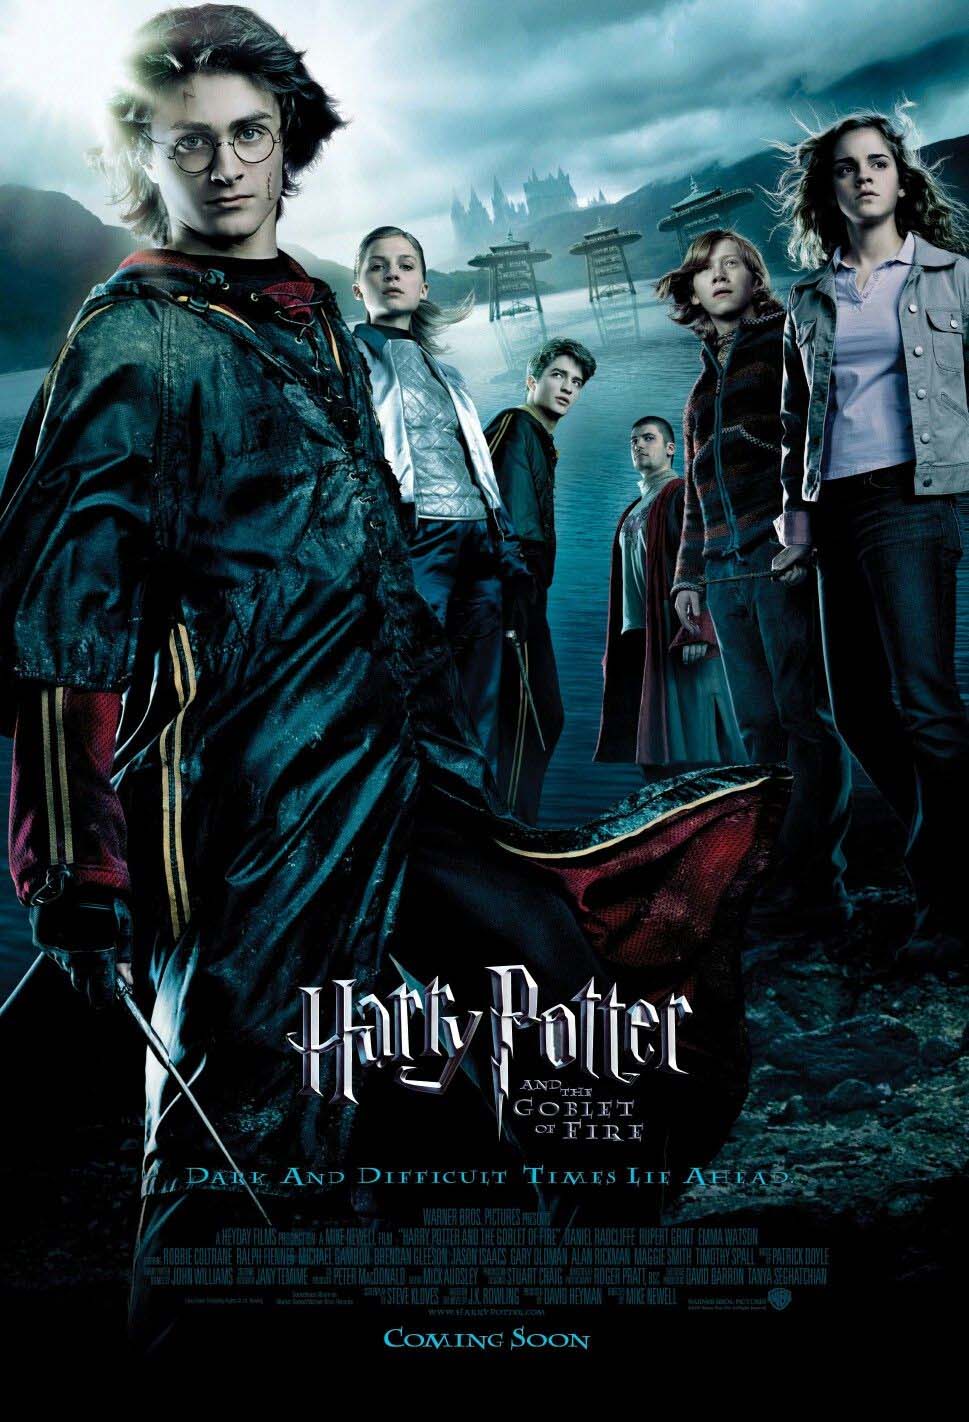 herry potter and the goblet of fire movie hibi dubbed 720p